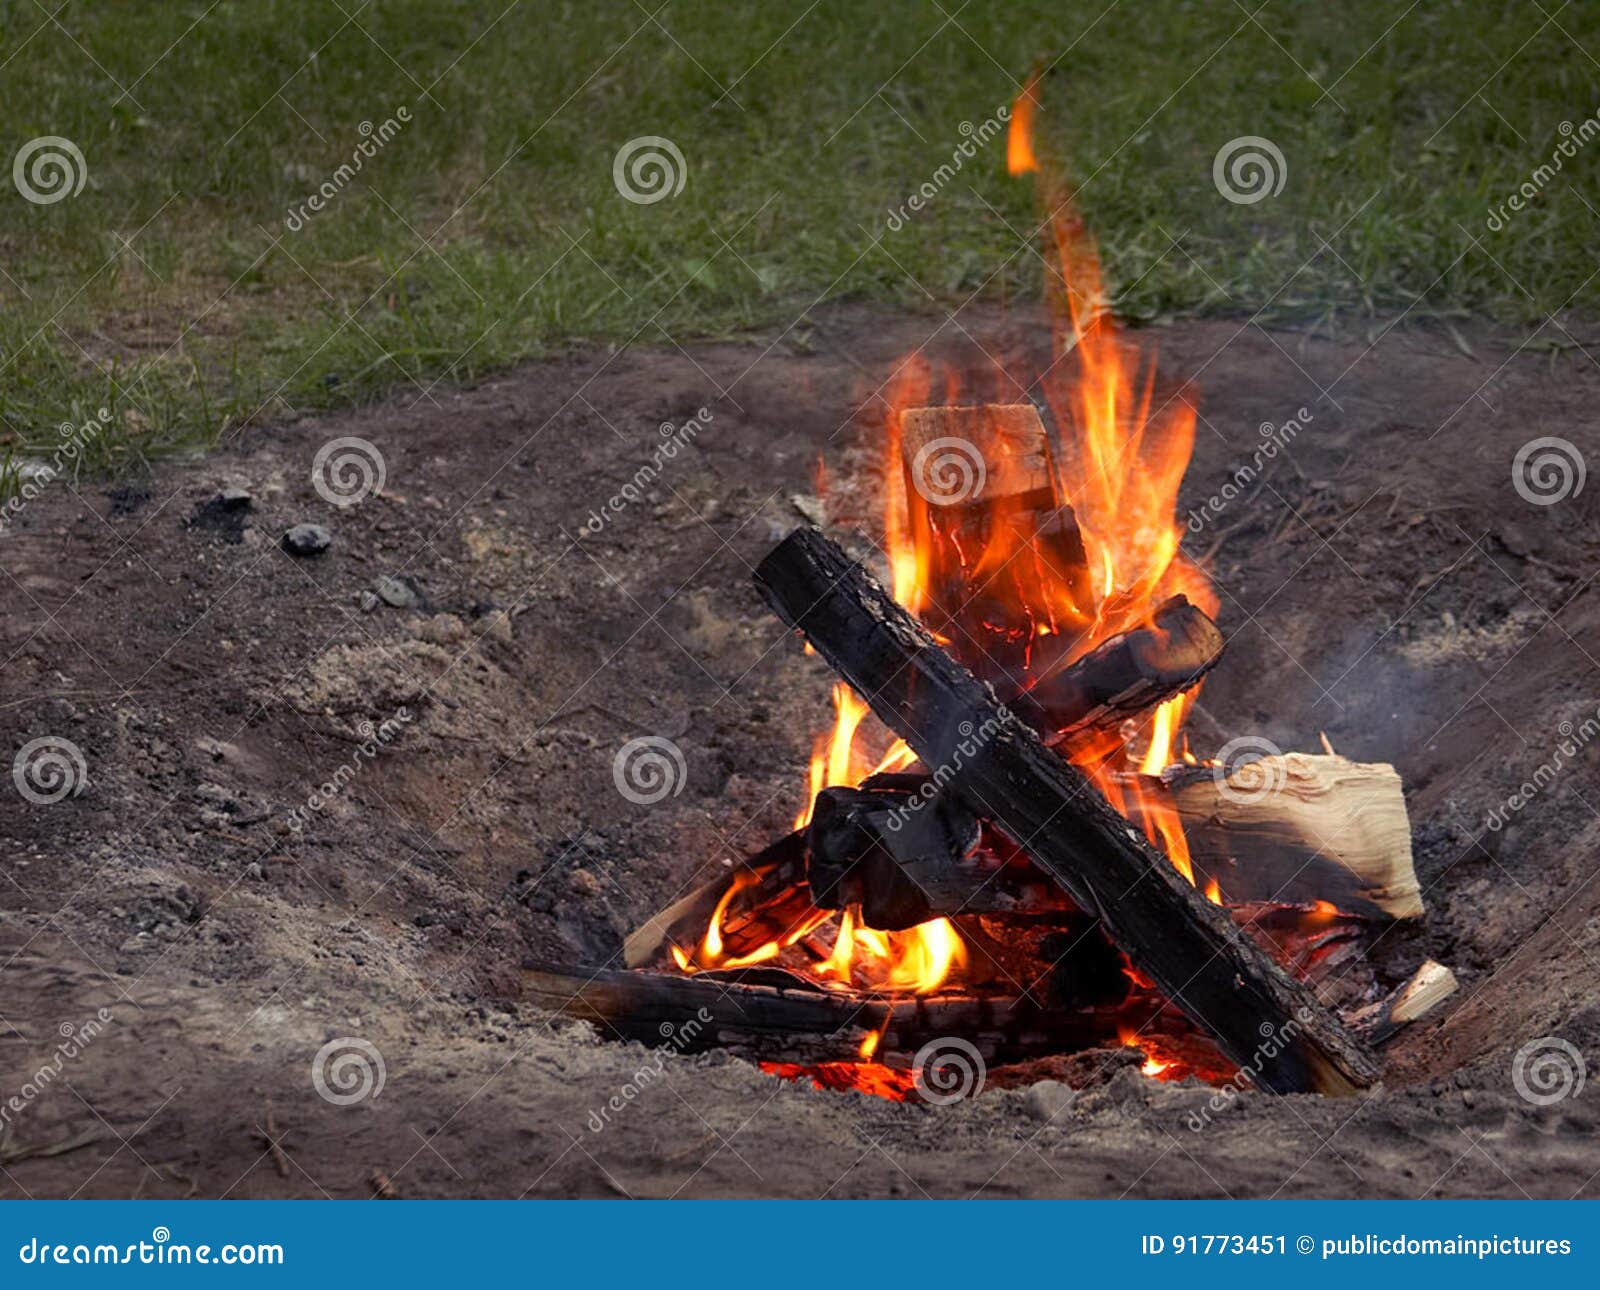 Campfire Picture. Image: 91773451